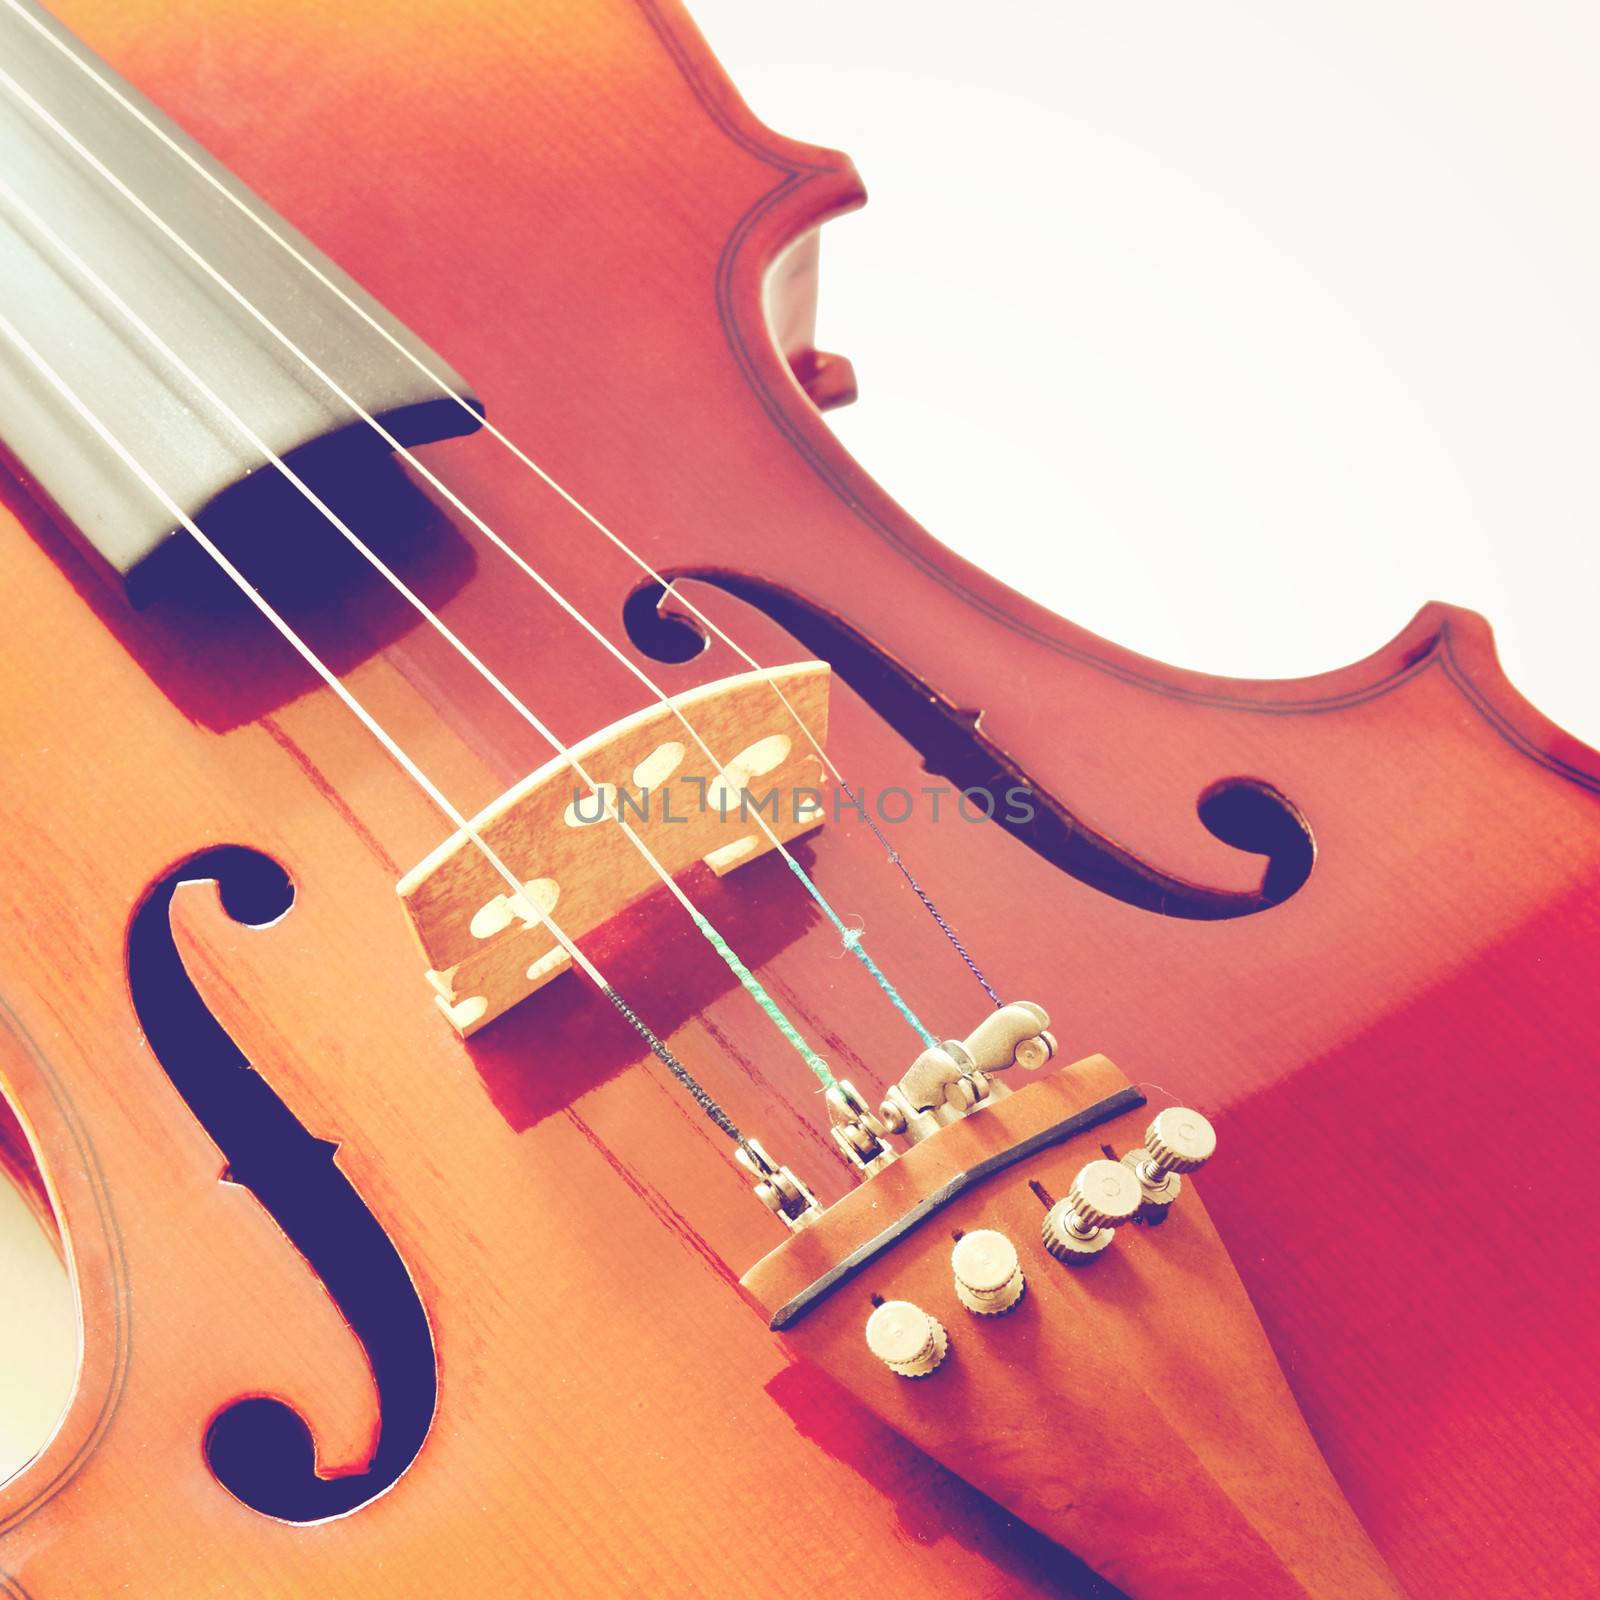 Part of violin with retro filter effect  by nuchylee